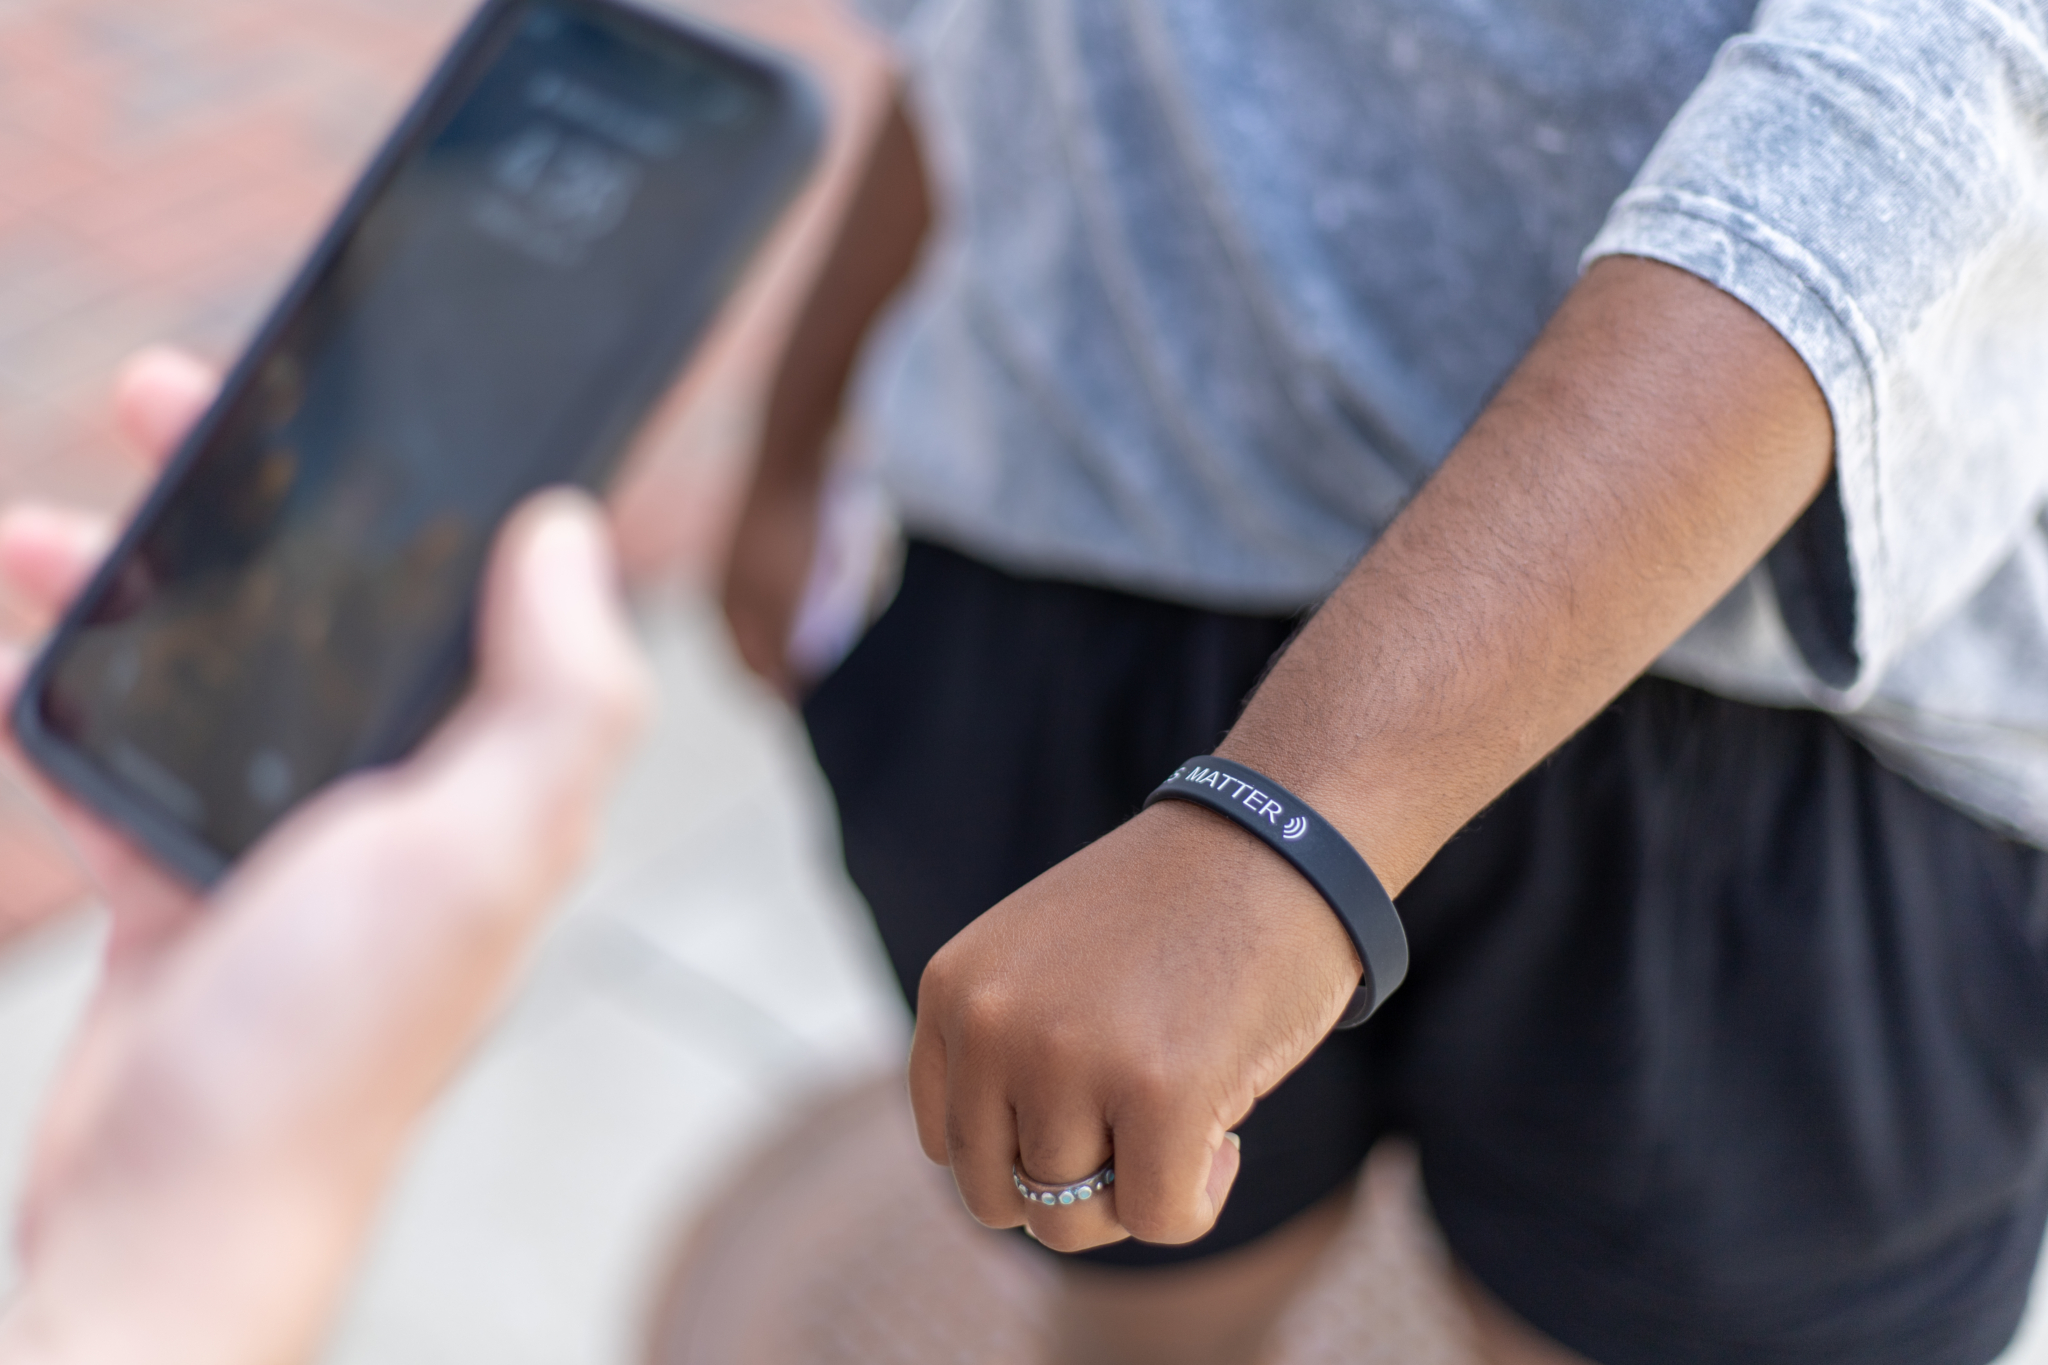 Linq 5702 Local tech startup launches $5 smart bracelet to share Black Lives Matter resources